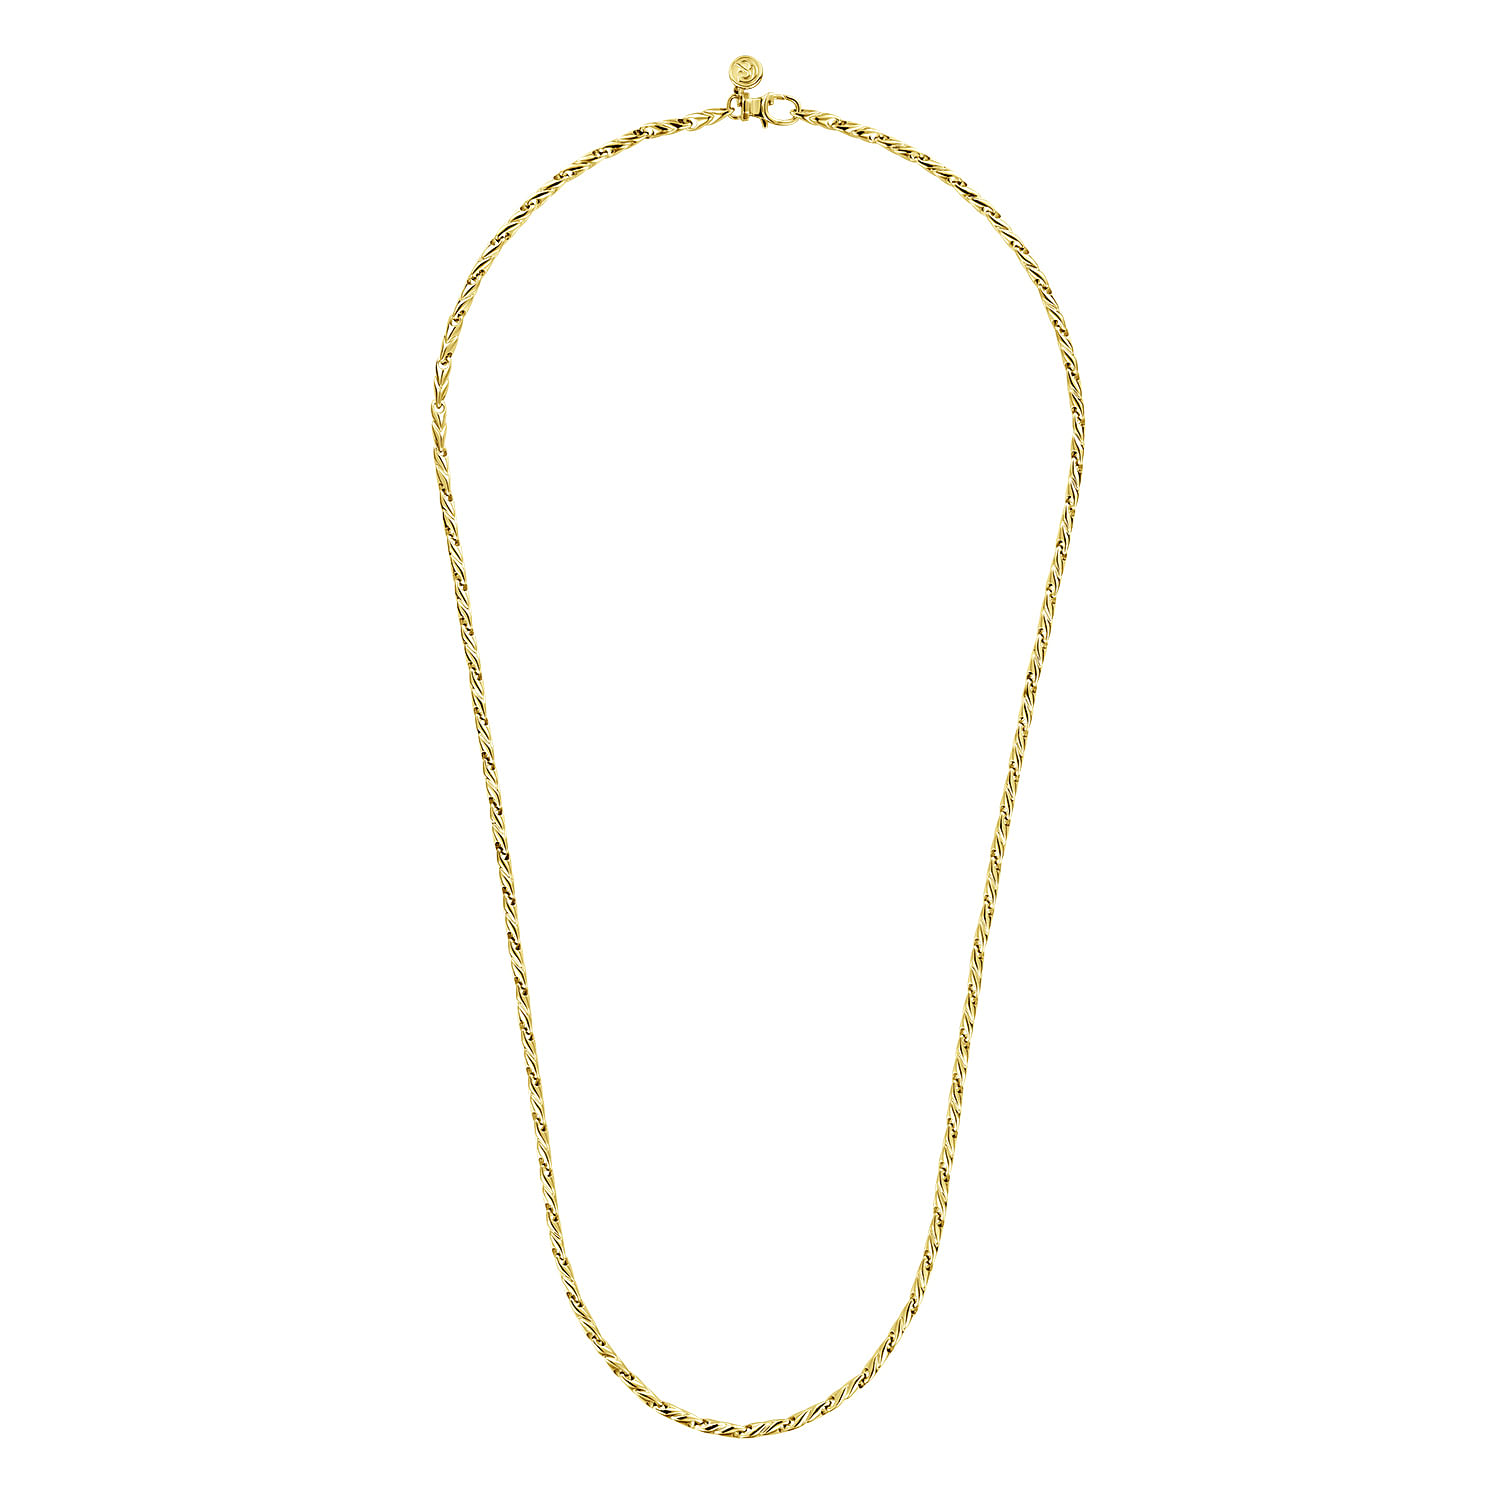 24 Inch 14K Yellow Gold Men's Chain Necklace